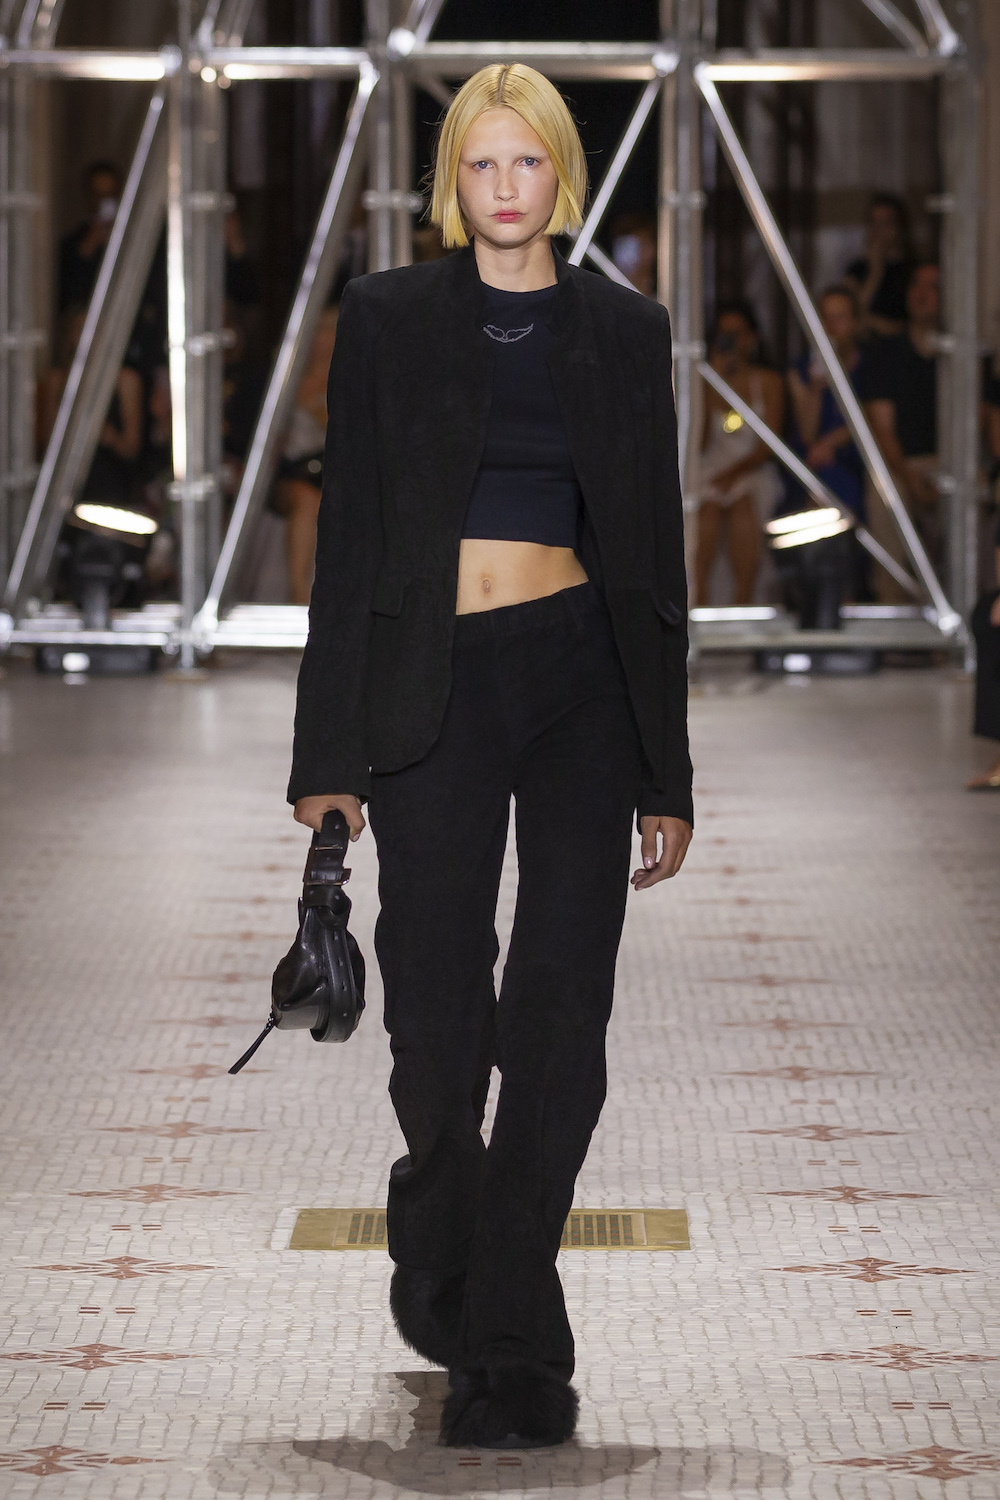  A look from the Zadig & Voltaire FW 22 show.